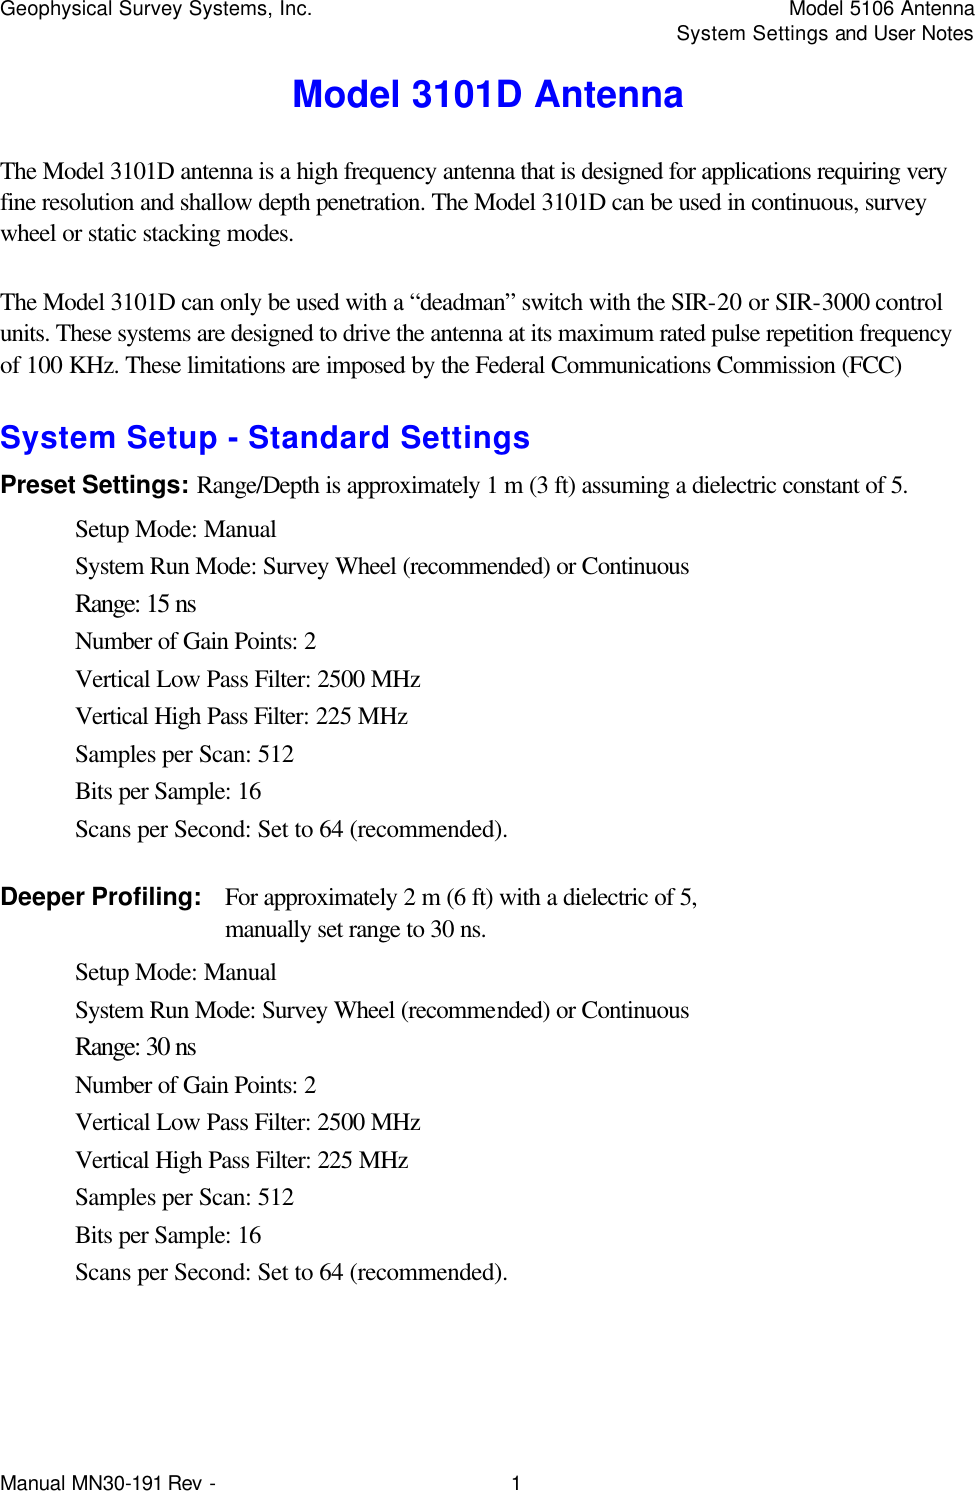 Geophysical Survey Systems, Inc.    Model 5106 Antenna     System Settings and User Notes Manual MN30-191 Rev - 1 Model 3101D Antenna The Model 3101D antenna is a high frequency antenna that is designed for applications requiring very fine resolution and shallow depth penetration. The Model 3101D can be used in continuous, survey wheel or static stacking modes. The Model 3101D can only be used with a “deadman” switch with the SIR-20 or SIR-3000 control units. These systems are designed to drive the antenna at its maximum rated pulse repetition frequency of 100 KHz. These limitations are imposed by the Federal Communications Commission (FCC) System Setup - Standard Settings Preset Settings: Range/Depth is approximately 1 m (3 ft) assuming a dielectric constant of 5. Setup Mode: Manual System Run Mode: Survey Wheel (recommended) or Continuous Range: 15 ns Number of Gain Points: 2 Vertical Low Pass Filter: 2500 MHz Vertical High Pass Filter: 225 MHz Samples per Scan: 512 Bits per Sample: 16 Scans per Second: Set to 64 (recommended). Deeper Profiling: For approximately 2 m (6 ft) with a dielectric of 5,   manually set range to 30 ns.  Setup Mode: Manual System Run Mode: Survey Wheel (recommended) or Continuous Range: 30 ns Number of Gain Points: 2 Vertical Low Pass Filter: 2500 MHz Vertical High Pass Filter: 225 MHz Samples per Scan: 512 Bits per Sample: 16 Scans per Second: Set to 64 (recommended).  